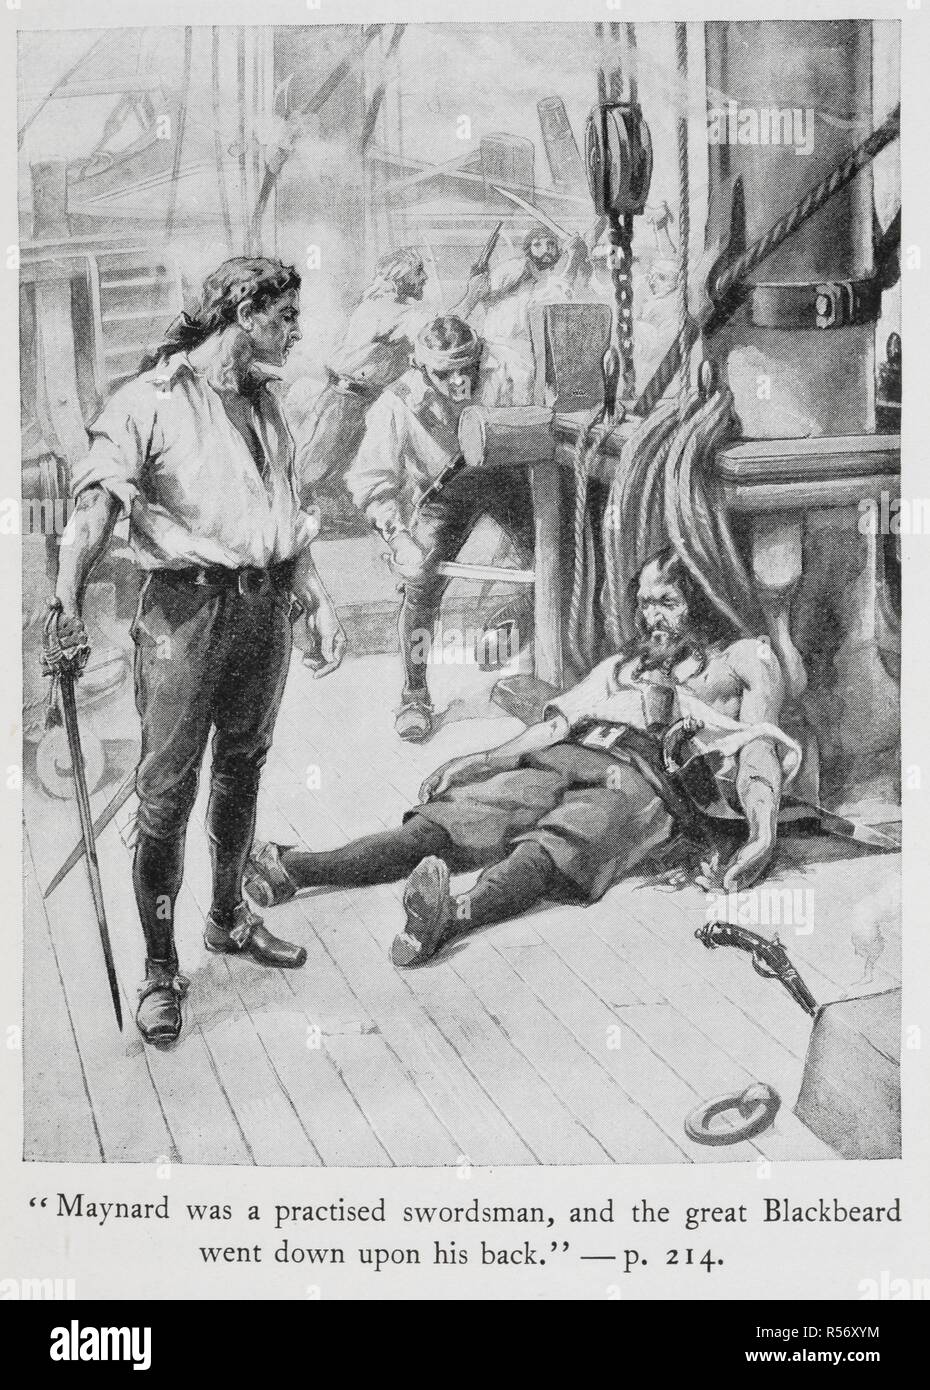 "Maynard was a praticed swordsman, and the great Blackbeard went down on his back". The killing of Blackbeard by Lieutenant Robert Maynard.  . Buccaneers and Pirates of our Coasts ... New York, 1898. Source: 9770.aa.8, opposite 214. Author: Stockton, Frank Richard. Stock Photo